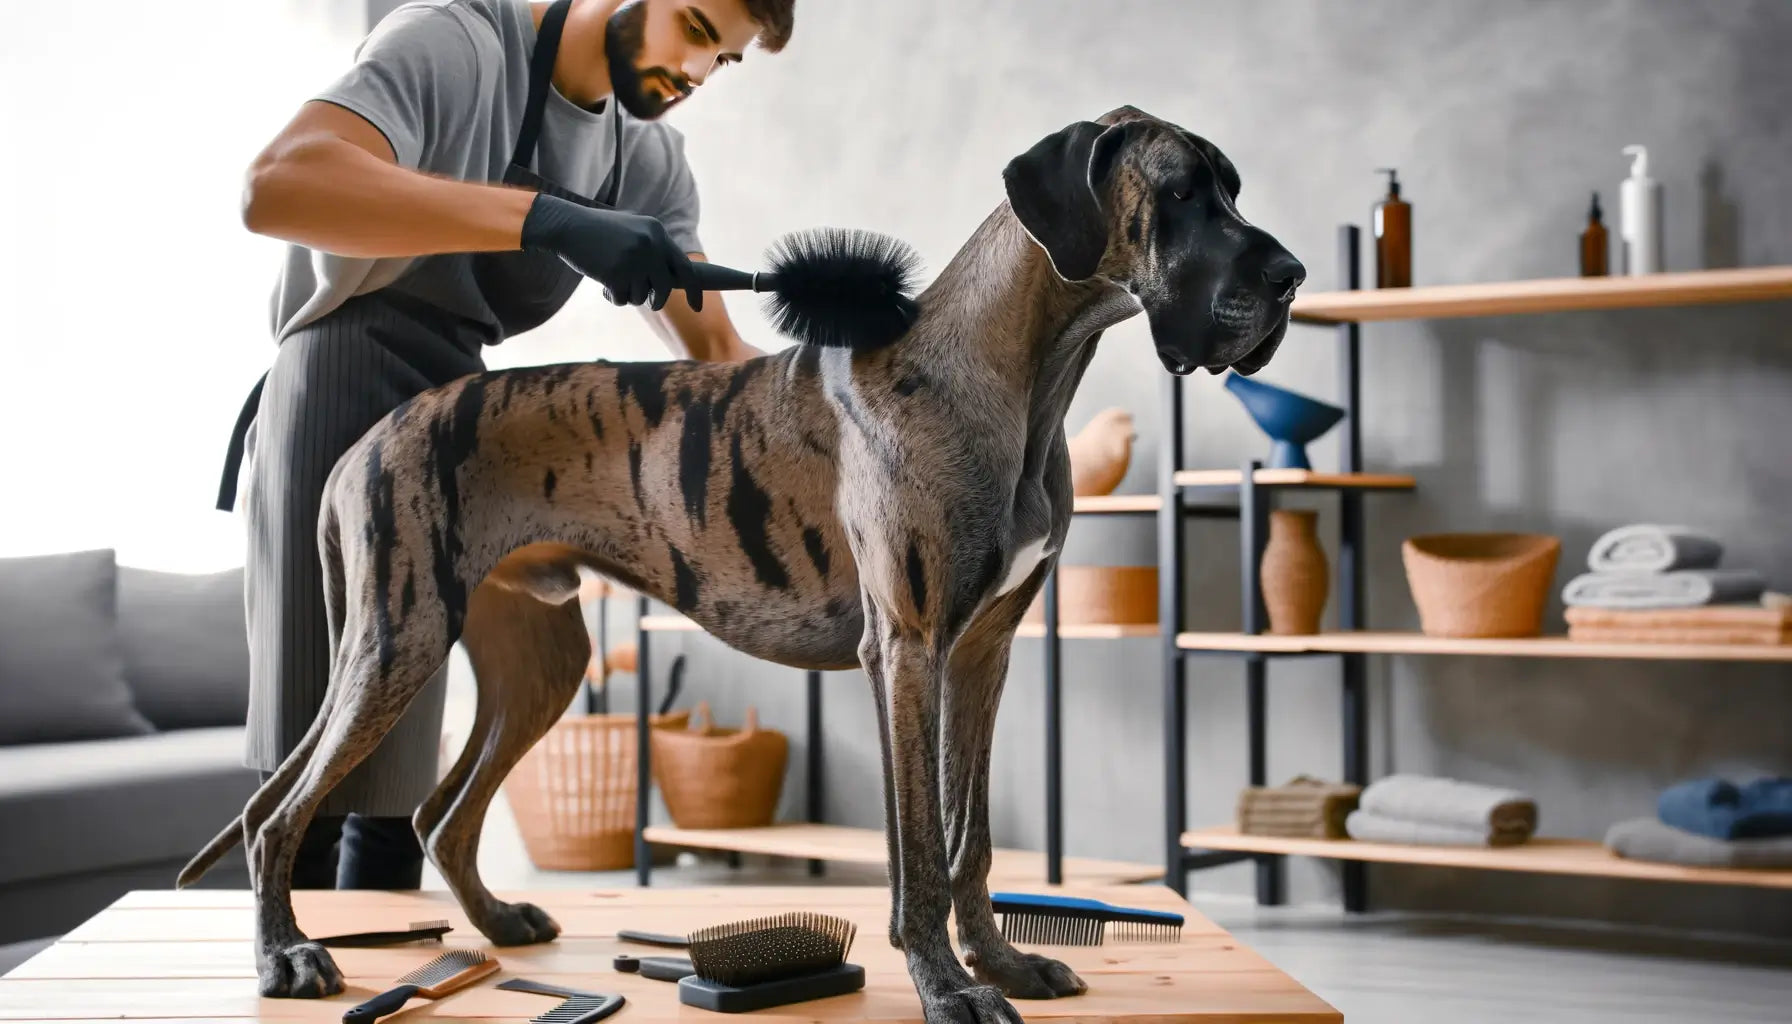 Brindle Great Dane being groomed by its owner at home.